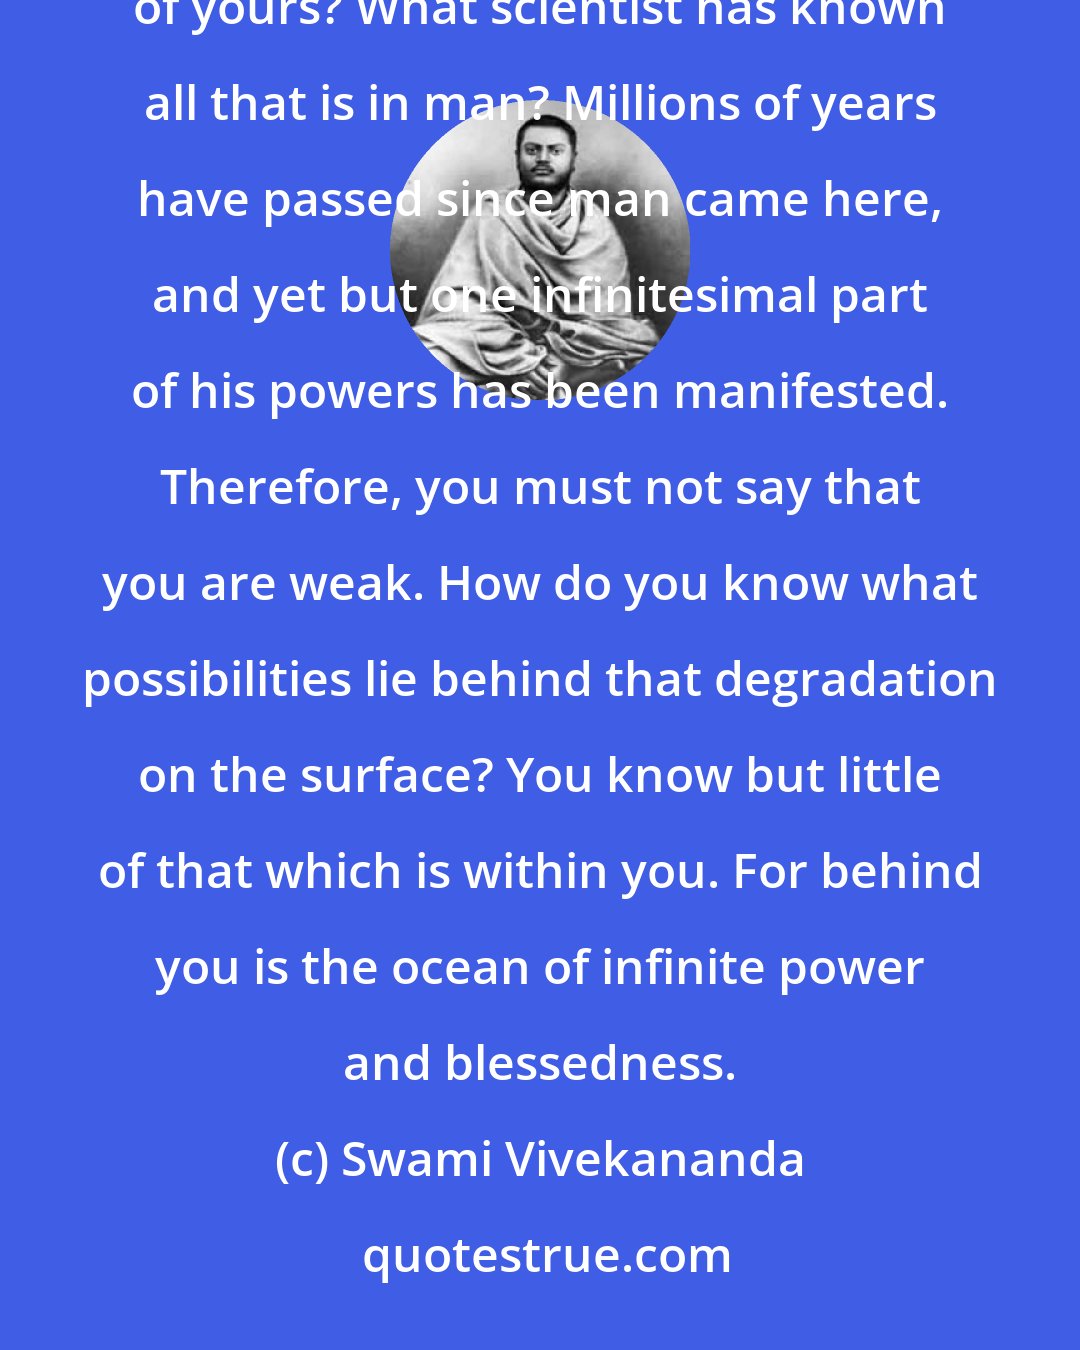 Swami Vivekananda: Do you know how much energy, how many powers, how many forces, are still lurking behind that frame of yours? What scientist has known all that is in man? Millions of years have passed since man came here, and yet but one infinitesimal part of his powers has been manifested. Therefore, you must not say that you are weak. How do you know what possibilities lie behind that degradation on the surface? You know but little of that which is within you. For behind you is the ocean of infinite power and blessedness.